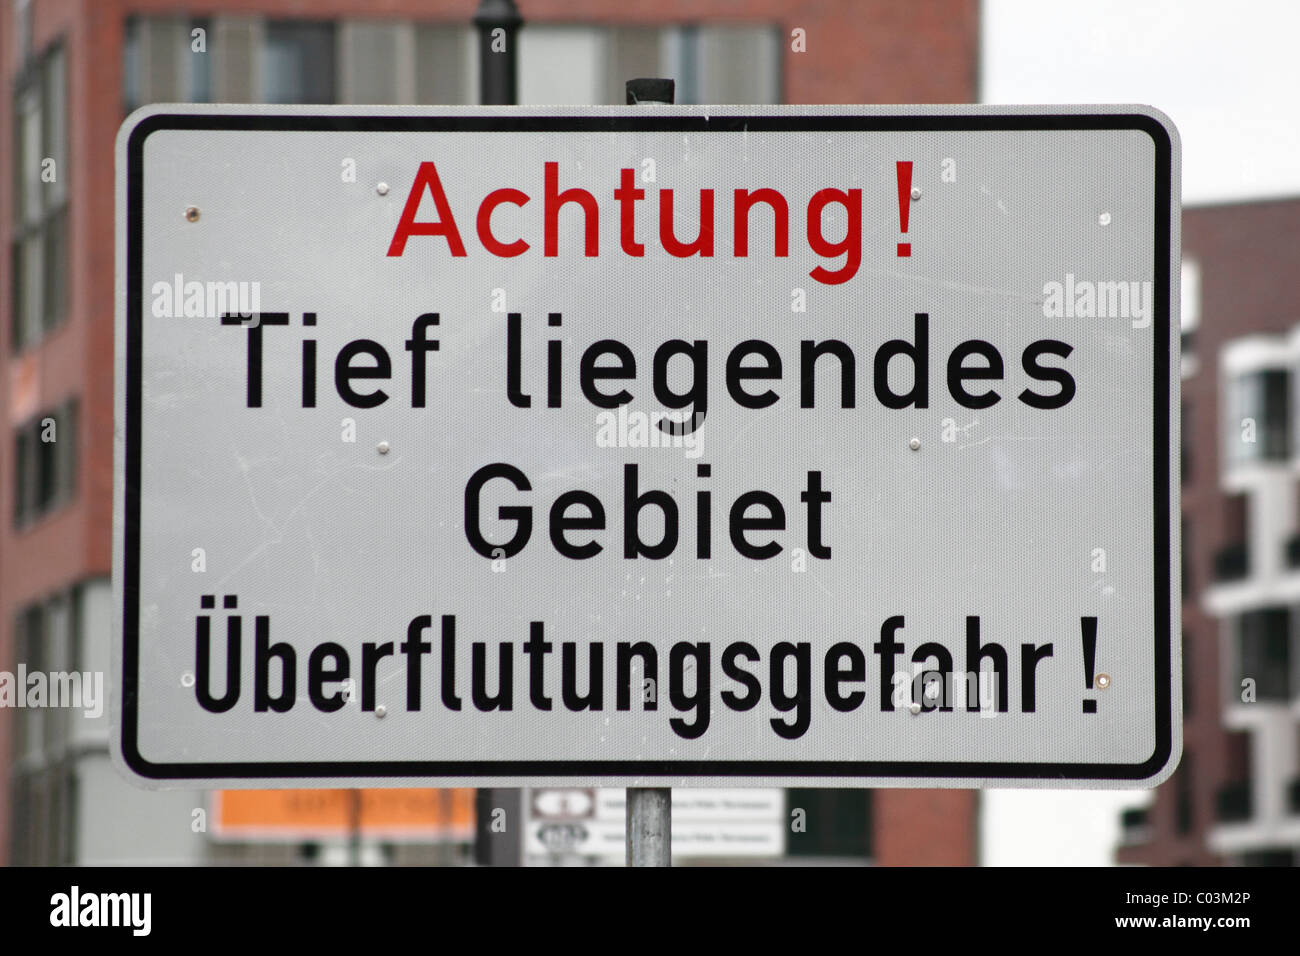 Warning sign 'Achtung! Tief liegendes Gebiet, Ueberflutungsgefahr!', German for 'Caution! Low-lying area, danger of flooding!' Stock Photo